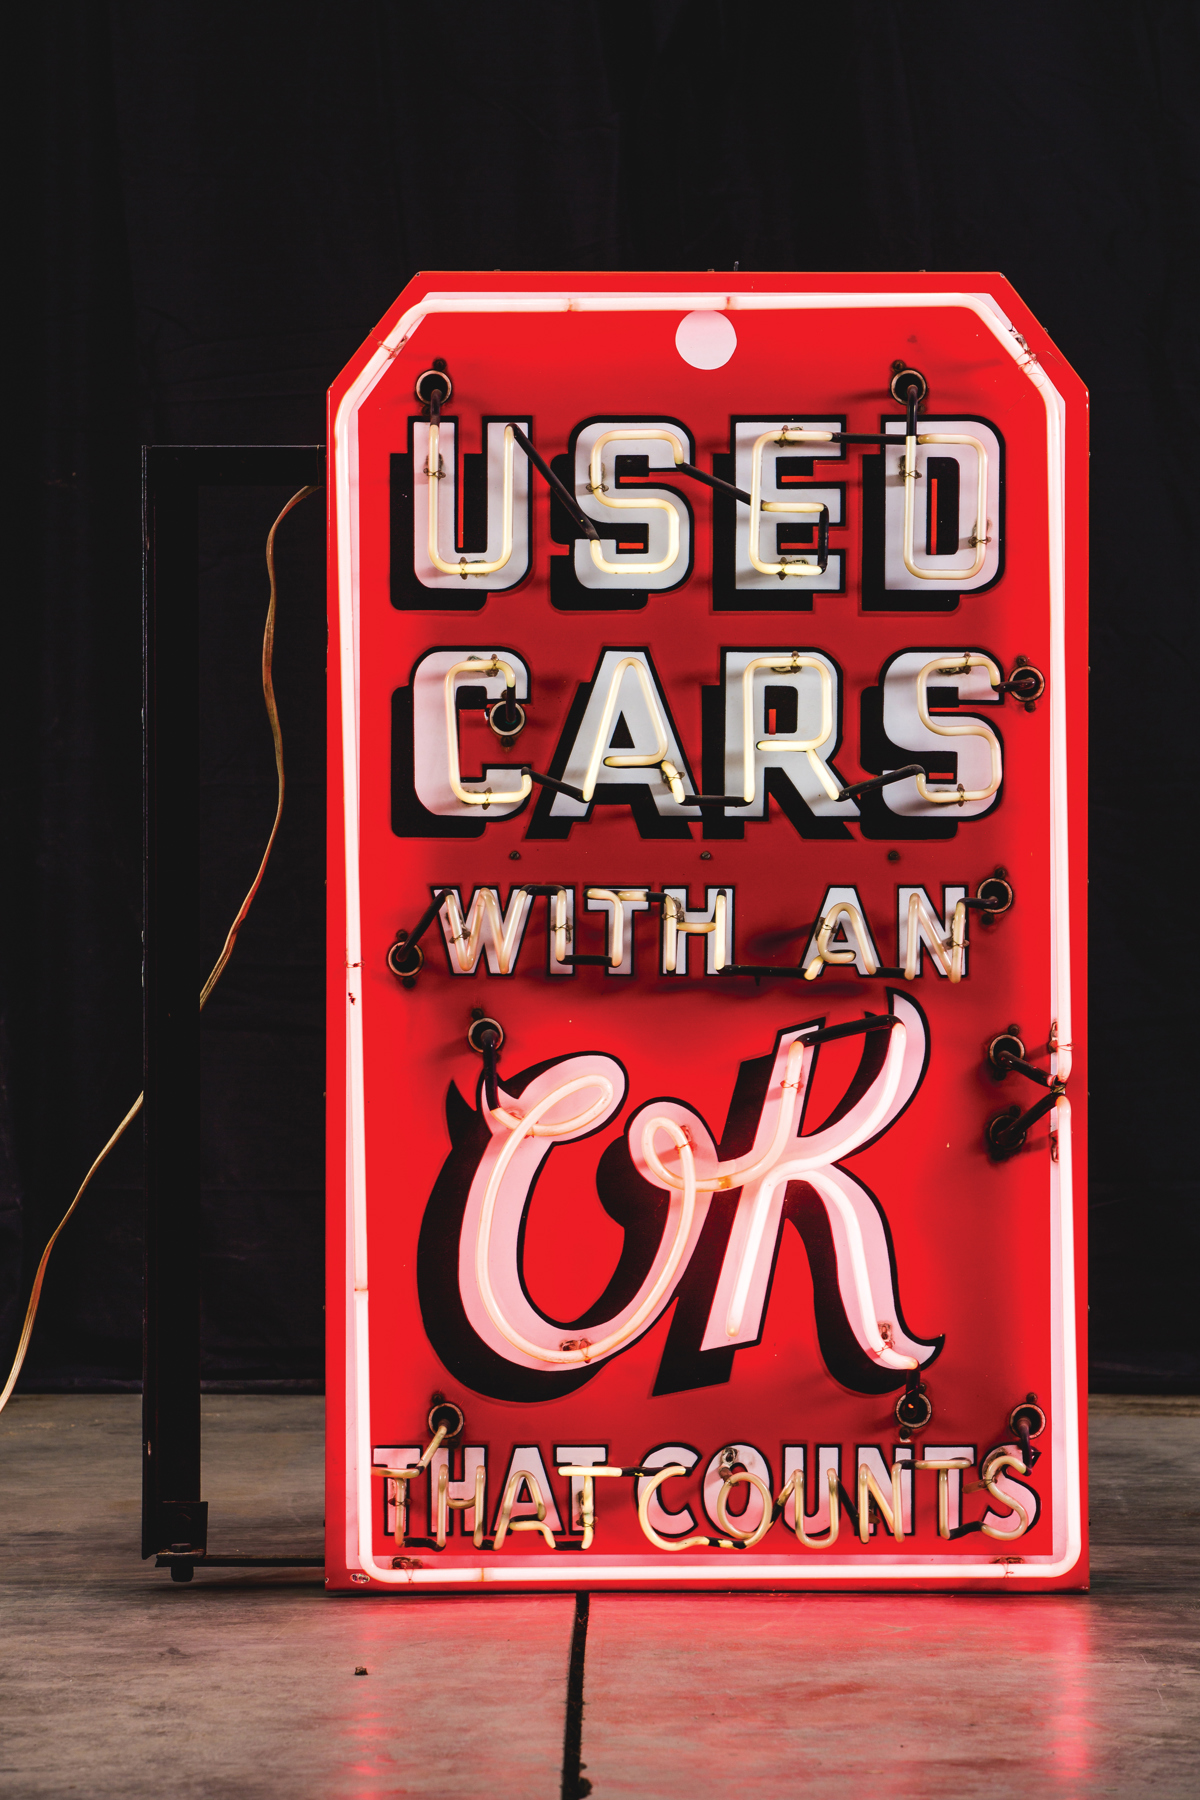 Chevrolet ‘Used Cars With An OK That Counts’ Neon Signs Mounted Back-To-Back offered at RM Auctions’ Auburn Spring 2019